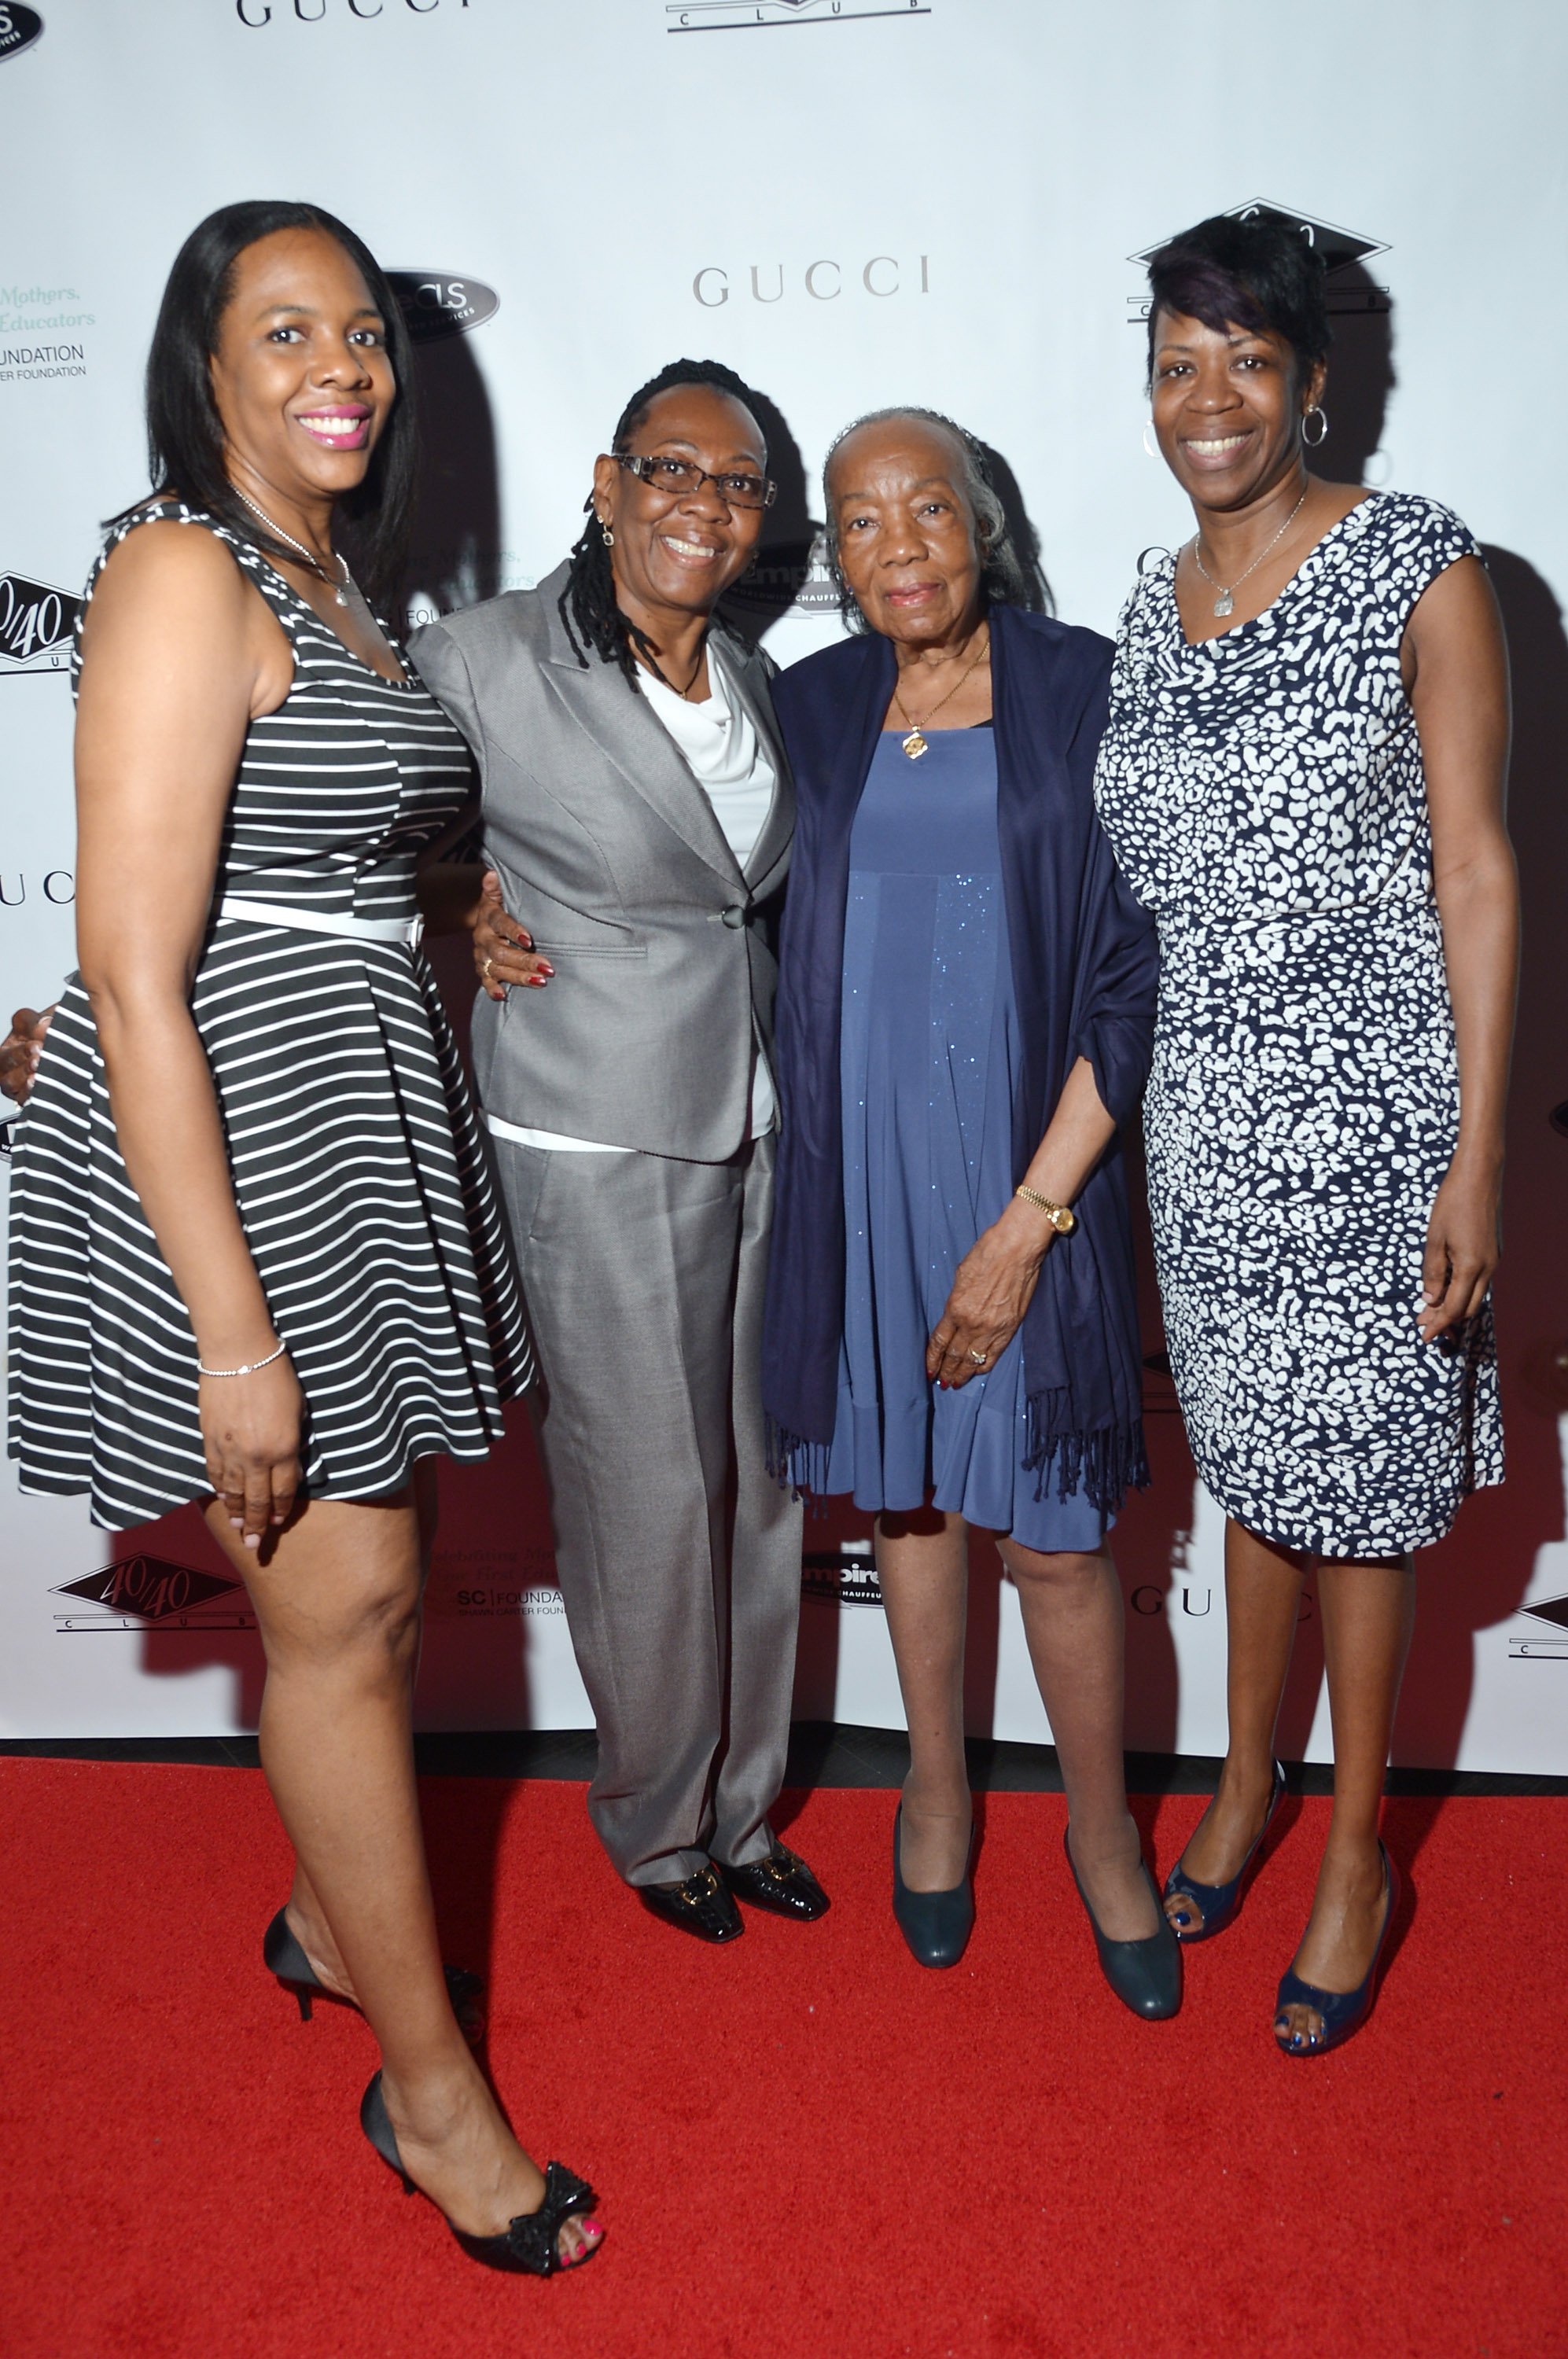 Annie Carter, Gloria Carter, Hattie Carter, and Michelle Carter at the Shawn Carter Foundation's Mother's Day event at 40/40 Club in New York City on May 11, 2013. | Source: Getty Images